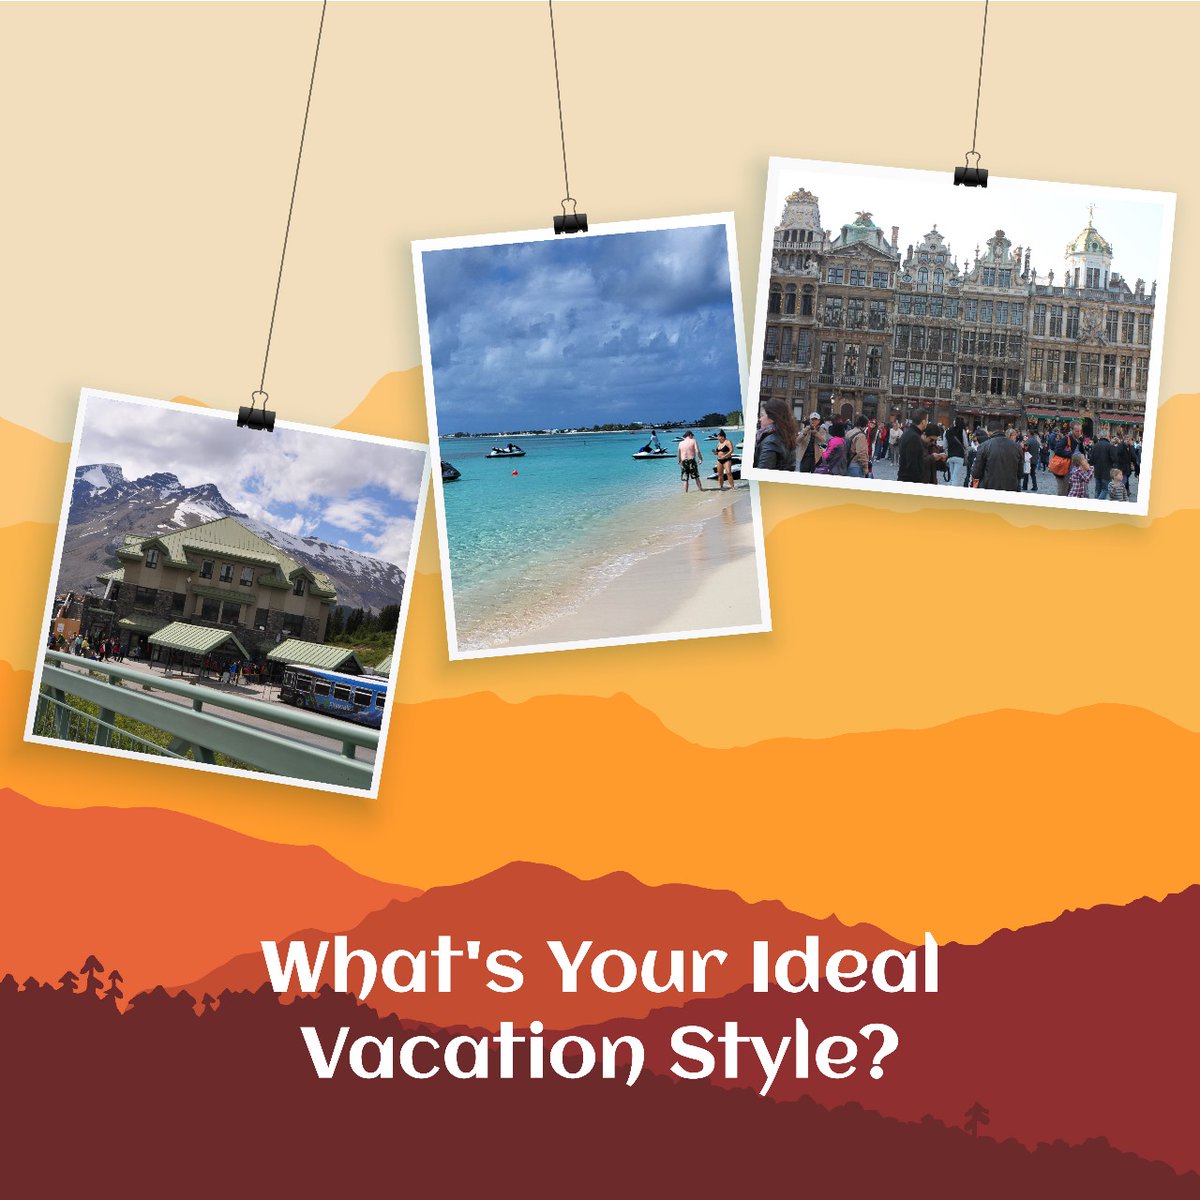 We have a blast of a time whenever we go on tour with our patrons. From hiking, to beach life, to city explorations and excursions into history. 

So, we want to know: What's your favourite part of any holiday?
#HolidayVibes #Adventure #SonaTours